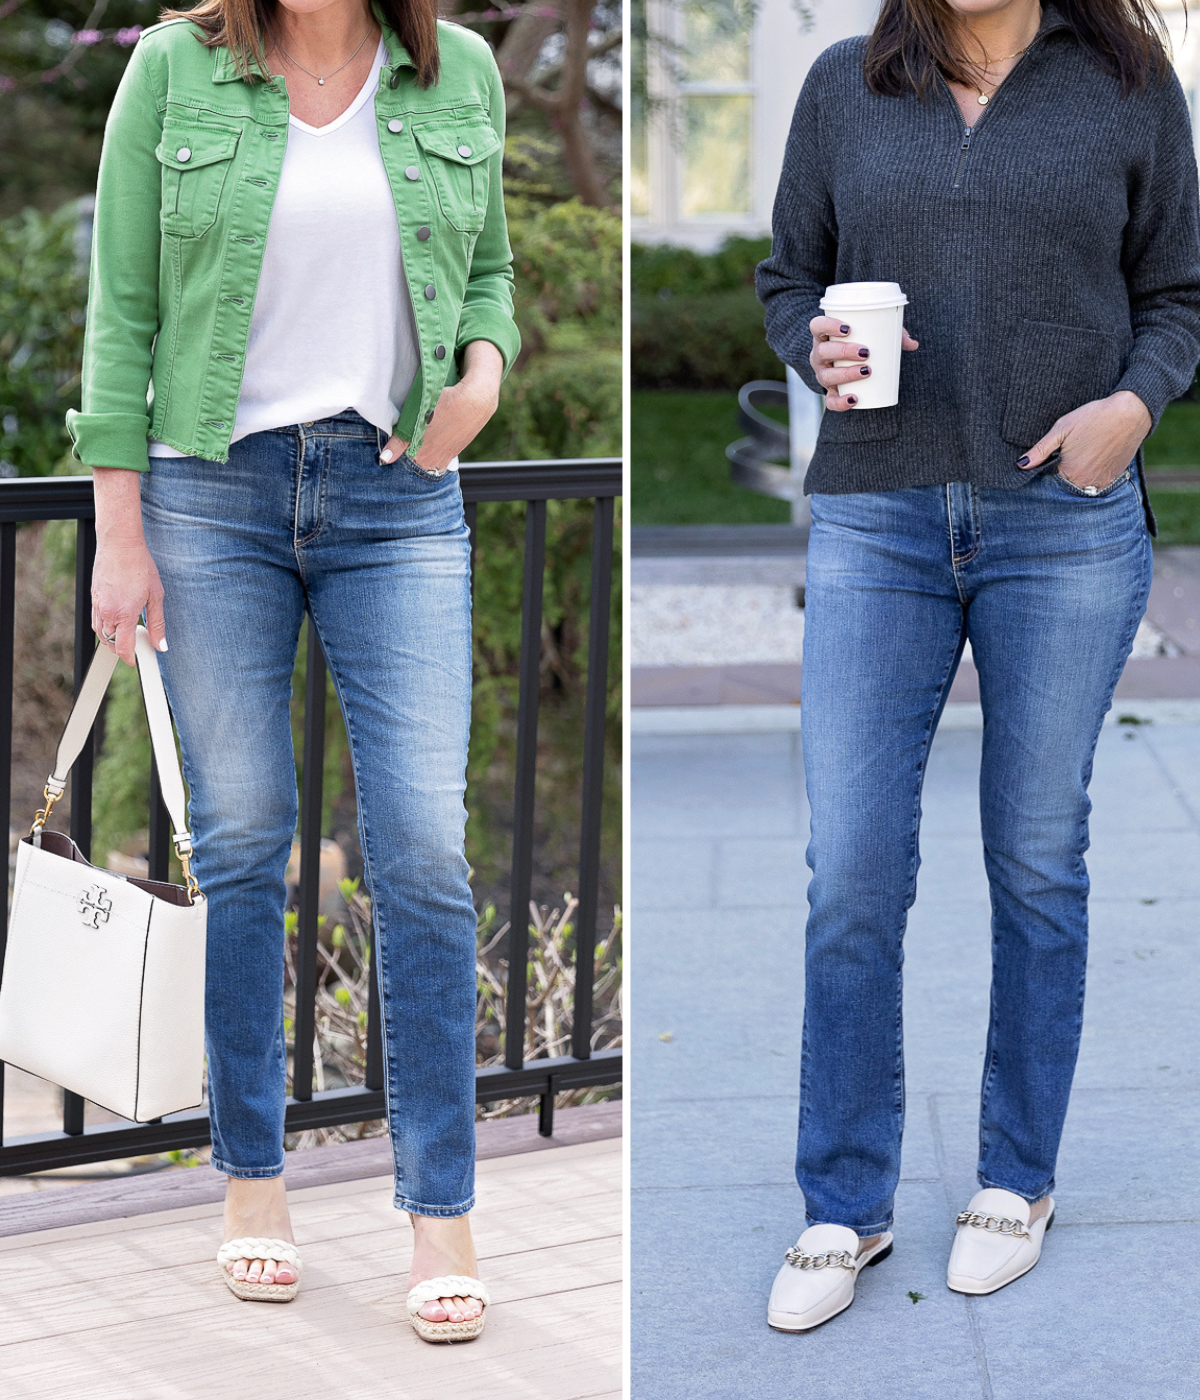 Denim Mistakes Women Often Make: Wearing jeans that are too big or too small.